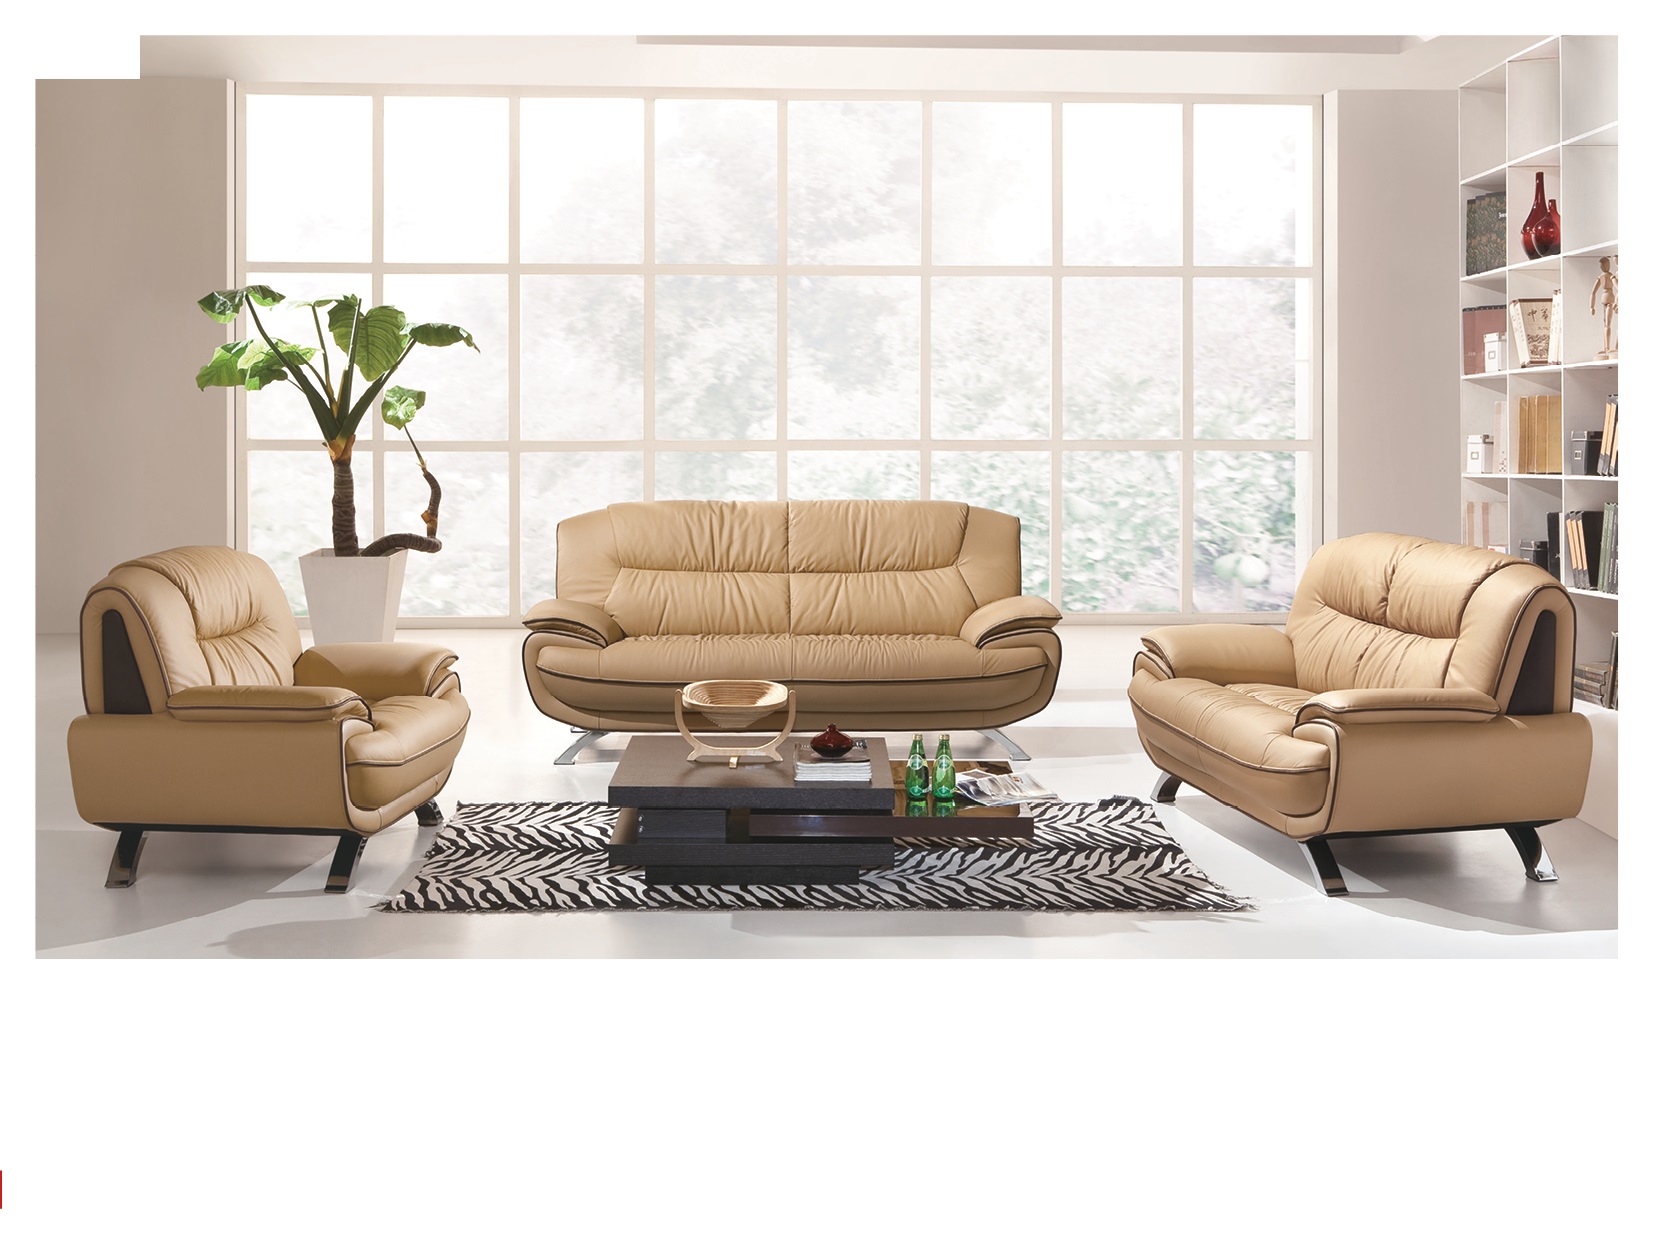 Living Room Furniture Reclining and Sliding Seats Sets 405 Beige/Brown